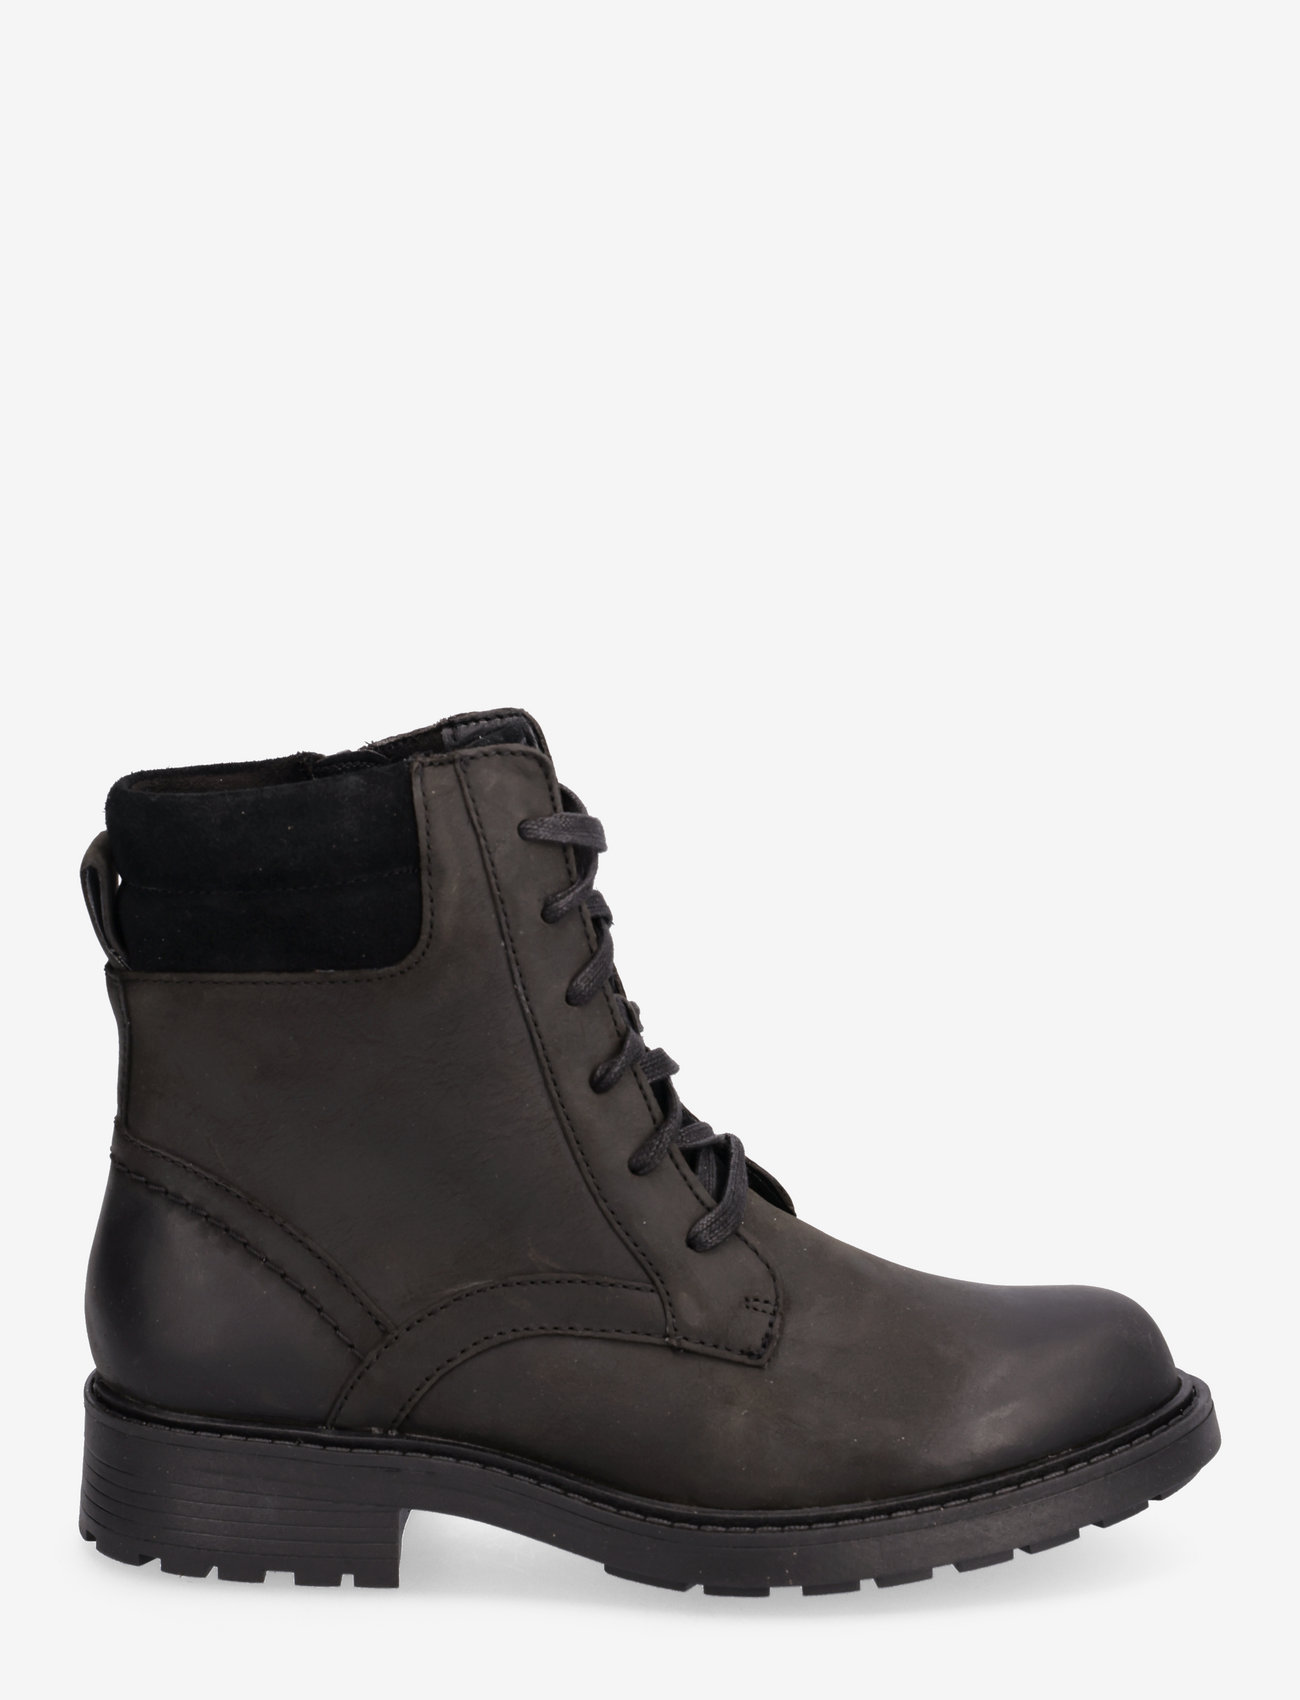 Clarks - Orinoco2 Spice - laced boots - black leather - 1